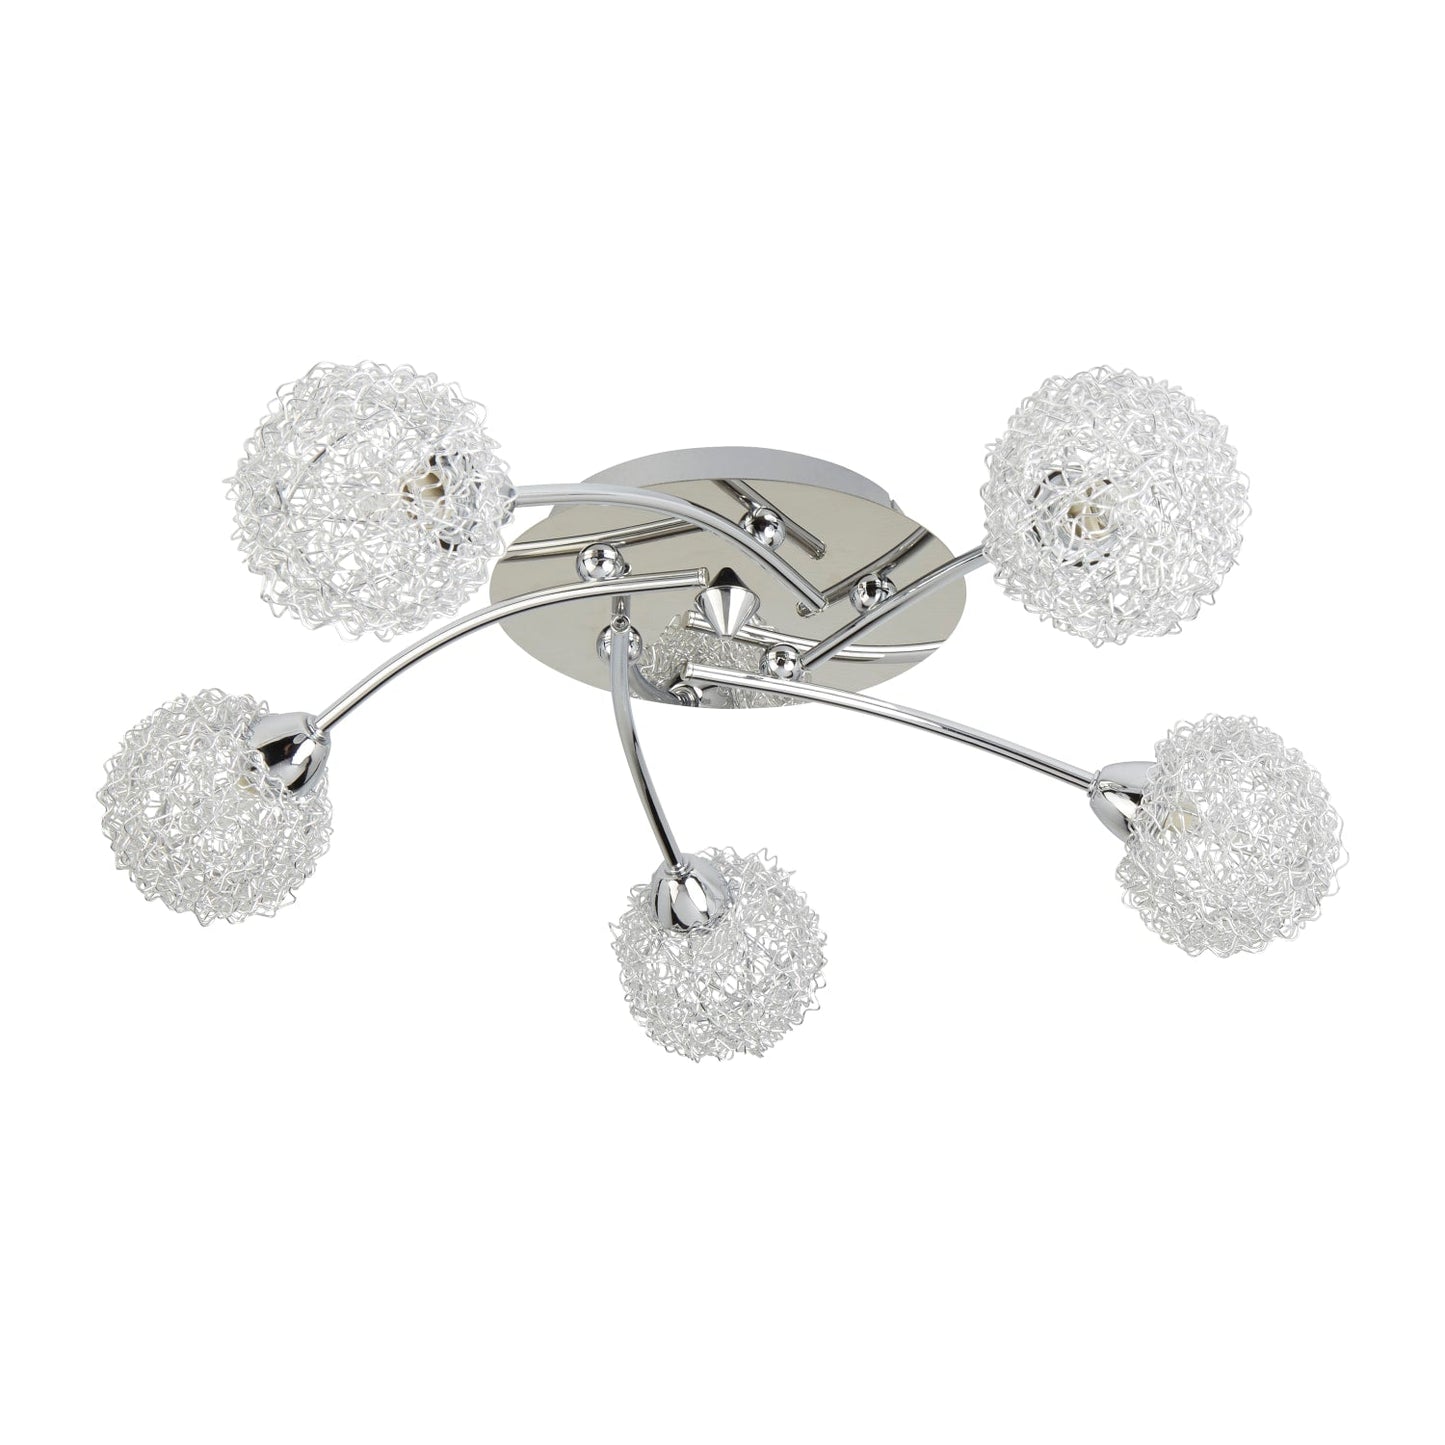 5 Light Ceiling Flush Light with Chrome and Aluminium Wire Shades